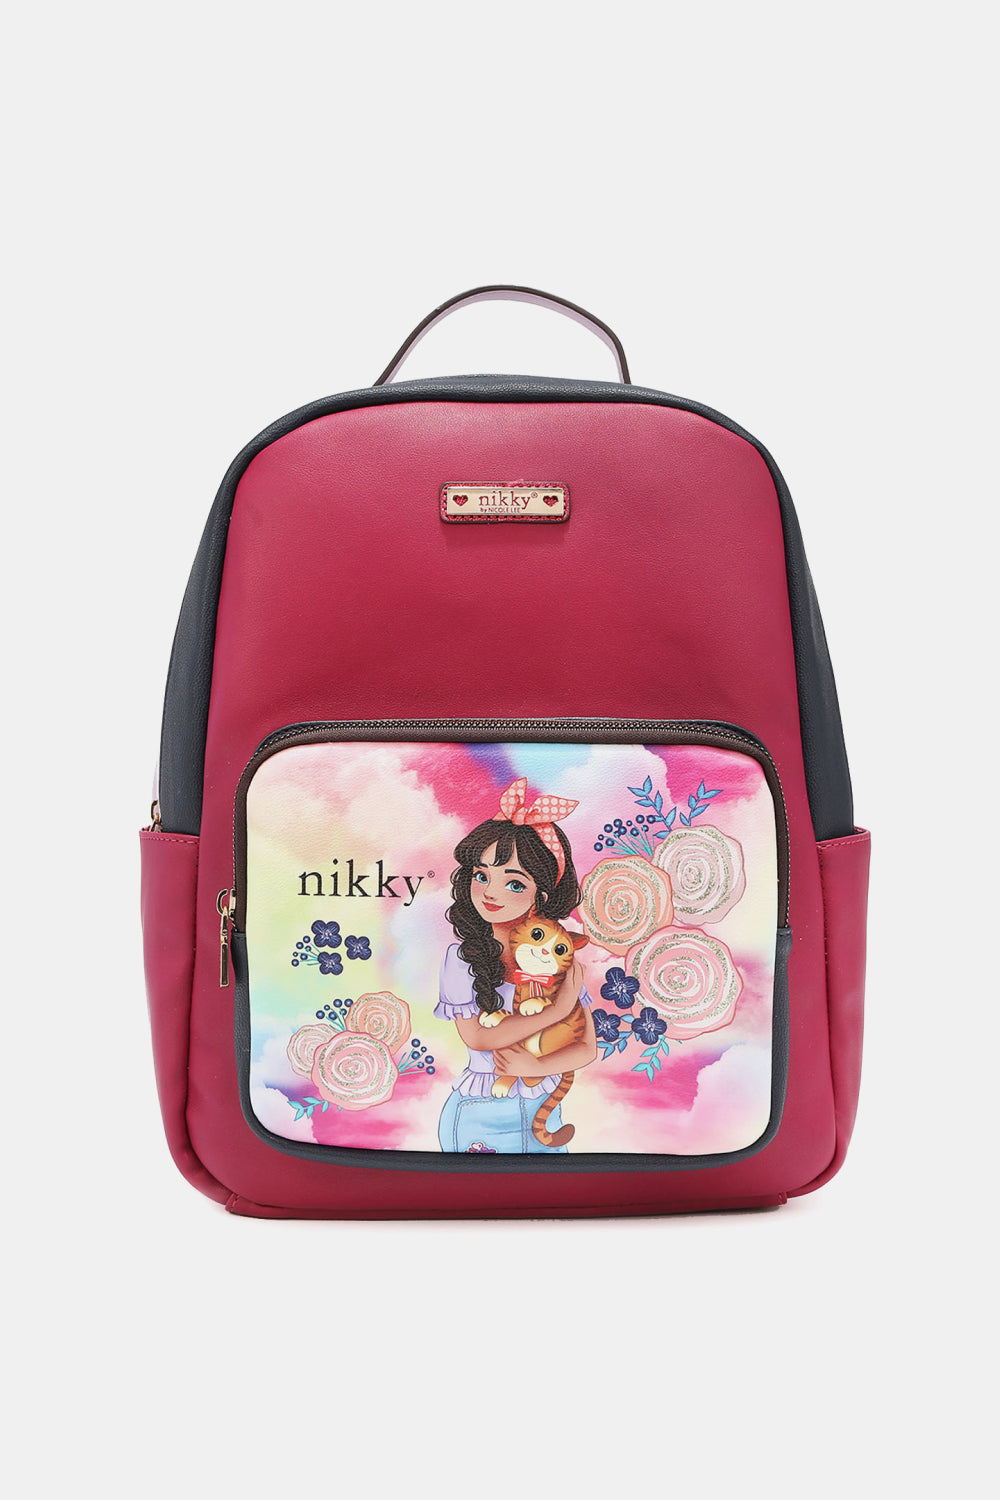 Nikky Fashion Backpack